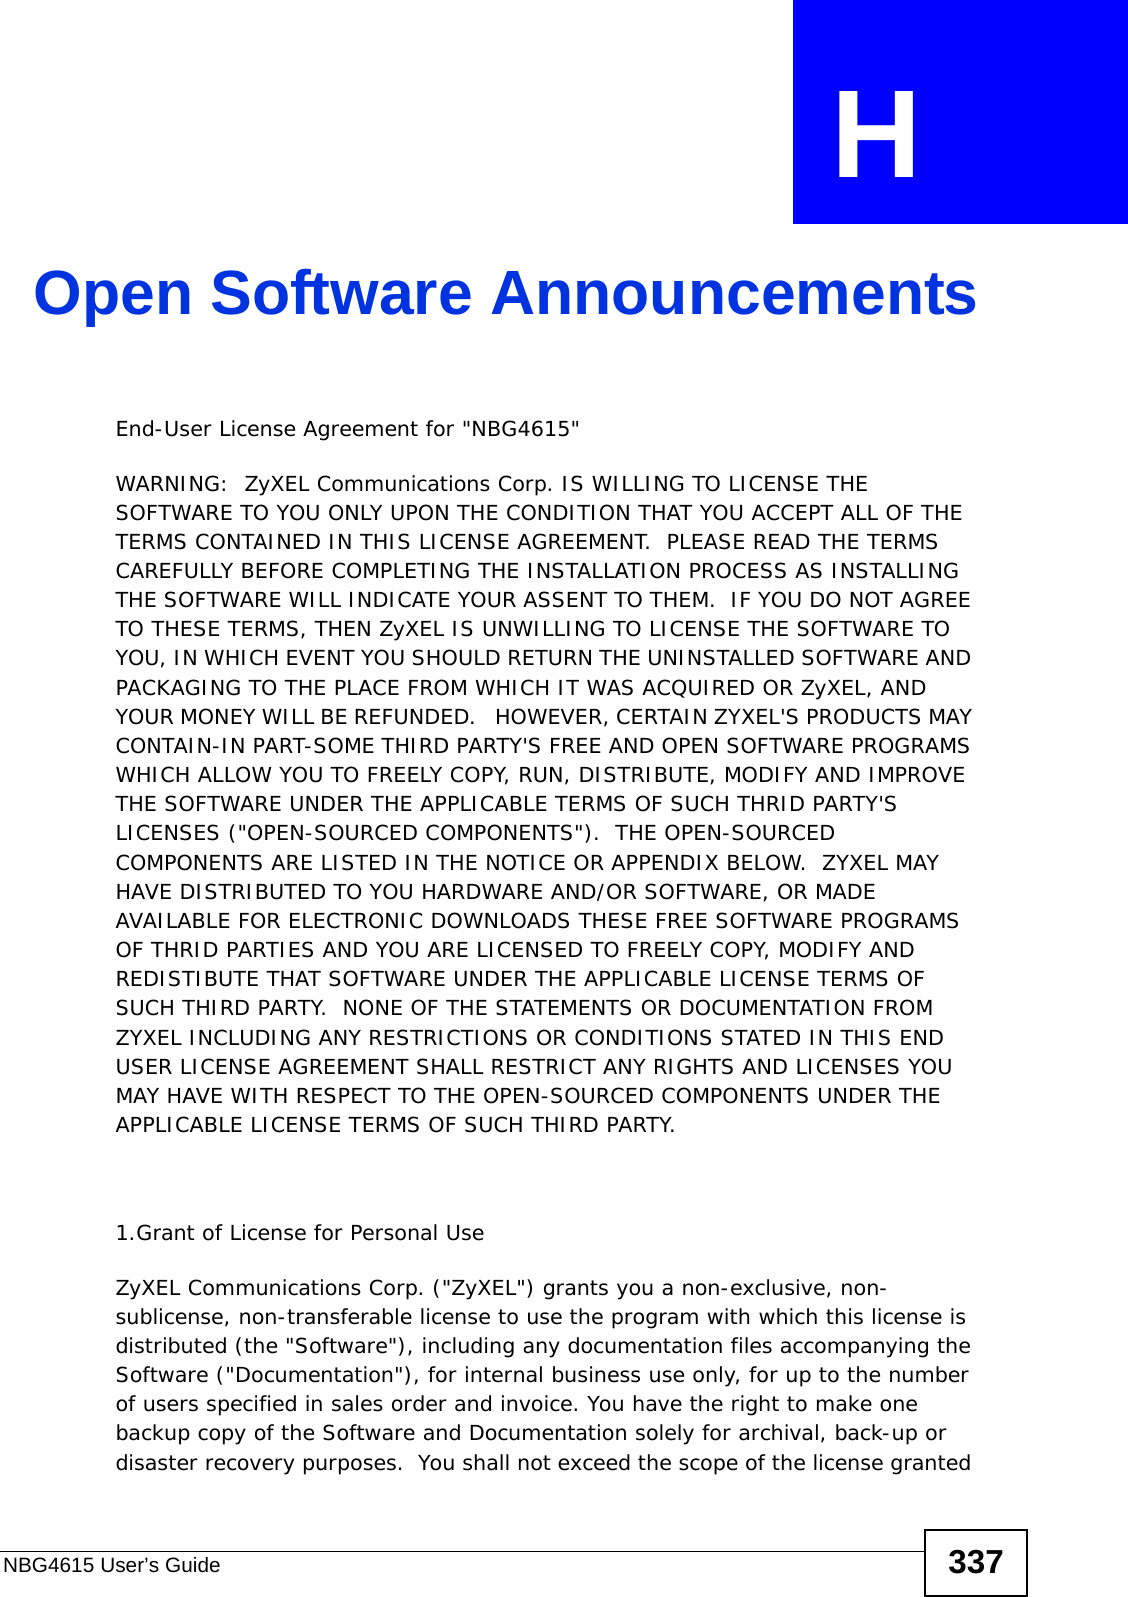 NBG4615 User’s Guide 337APPENDIX  H Open Software AnnouncementsEnd-User License Agreement for &quot;NBG4615&quot; WARNING:  ZyXEL Communications Corp. IS WILLING TO LICENSE THE SOFTWARE TO YOU ONLY UPON THE CONDITION THAT YOU ACCEPT ALL OF THE TERMS CONTAINED IN THIS LICENSE AGREEMENT.  PLEASE READ THE TERMS CAREFULLY BEFORE COMPLETING THE INSTALLATION PROCESS AS INSTALLING THE SOFTWARE WILL INDICATE YOUR ASSENT TO THEM.  IF YOU DO NOT AGREE TO THESE TERMS, THEN ZyXEL IS UNWILLING TO LICENSE THE SOFTWARE TO YOU, IN WHICH EVENT YOU SHOULD RETURN THE UNINSTALLED SOFTWARE AND PACKAGING TO THE PLACE FROM WHICH IT WAS ACQUIRED OR ZyXEL, AND YOUR MONEY WILL BE REFUNDED.   HOWEVER, CERTAIN ZYXEL&apos;S PRODUCTS MAY CONTAIN-IN PART-SOME THIRD PARTY&apos;S FREE AND OPEN SOFTWARE PROGRAMS WHICH ALLOW YOU TO FREELY COPY, RUN, DISTRIBUTE, MODIFY AND IMPROVE THE SOFTWARE UNDER THE APPLICABLE TERMS OF SUCH THRID PARTY&apos;S LICENSES (&quot;OPEN-SOURCED COMPONENTS&quot;).  THE OPEN-SOURCED COMPONENTS ARE LISTED IN THE NOTICE OR APPENDIX BELOW.  ZYXEL MAY HAVE DISTRIBUTED TO YOU HARDWARE AND/OR SOFTWARE, OR MADE AVAILABLE FOR ELECTRONIC DOWNLOADS THESE FREE SOFTWARE PROGRAMS OF THRID PARTIES AND YOU ARE LICENSED TO FREELY COPY, MODIFY AND REDISTIBUTE THAT SOFTWARE UNDER THE APPLICABLE LICENSE TERMS OF SUCH THIRD PARTY.  NONE OF THE STATEMENTS OR DOCUMENTATION FROM ZYXEL INCLUDING ANY RESTRICTIONS OR CONDITIONS STATED IN THIS END USER LICENSE AGREEMENT SHALL RESTRICT ANY RIGHTS AND LICENSES YOU MAY HAVE WITH RESPECT TO THE OPEN-SOURCED COMPONENTS UNDER THE APPLICABLE LICENSE TERMS OF SUCH THIRD PARTY.   1.Grant of License for Personal UseZyXEL Communications Corp. (&quot;ZyXEL&quot;) grants you a non-exclusive, non-sublicense, non-transferable license to use the program with which this license is distributed (the &quot;Software&quot;), including any documentation files accompanying the Software (&quot;Documentation&quot;), for internal business use only, for up to the number of users specified in sales order and invoice. You have the right to make one backup copy of the Software and Documentation solely for archival, back-up or disaster recovery purposes.  You shall not exceed the scope of the license granted 